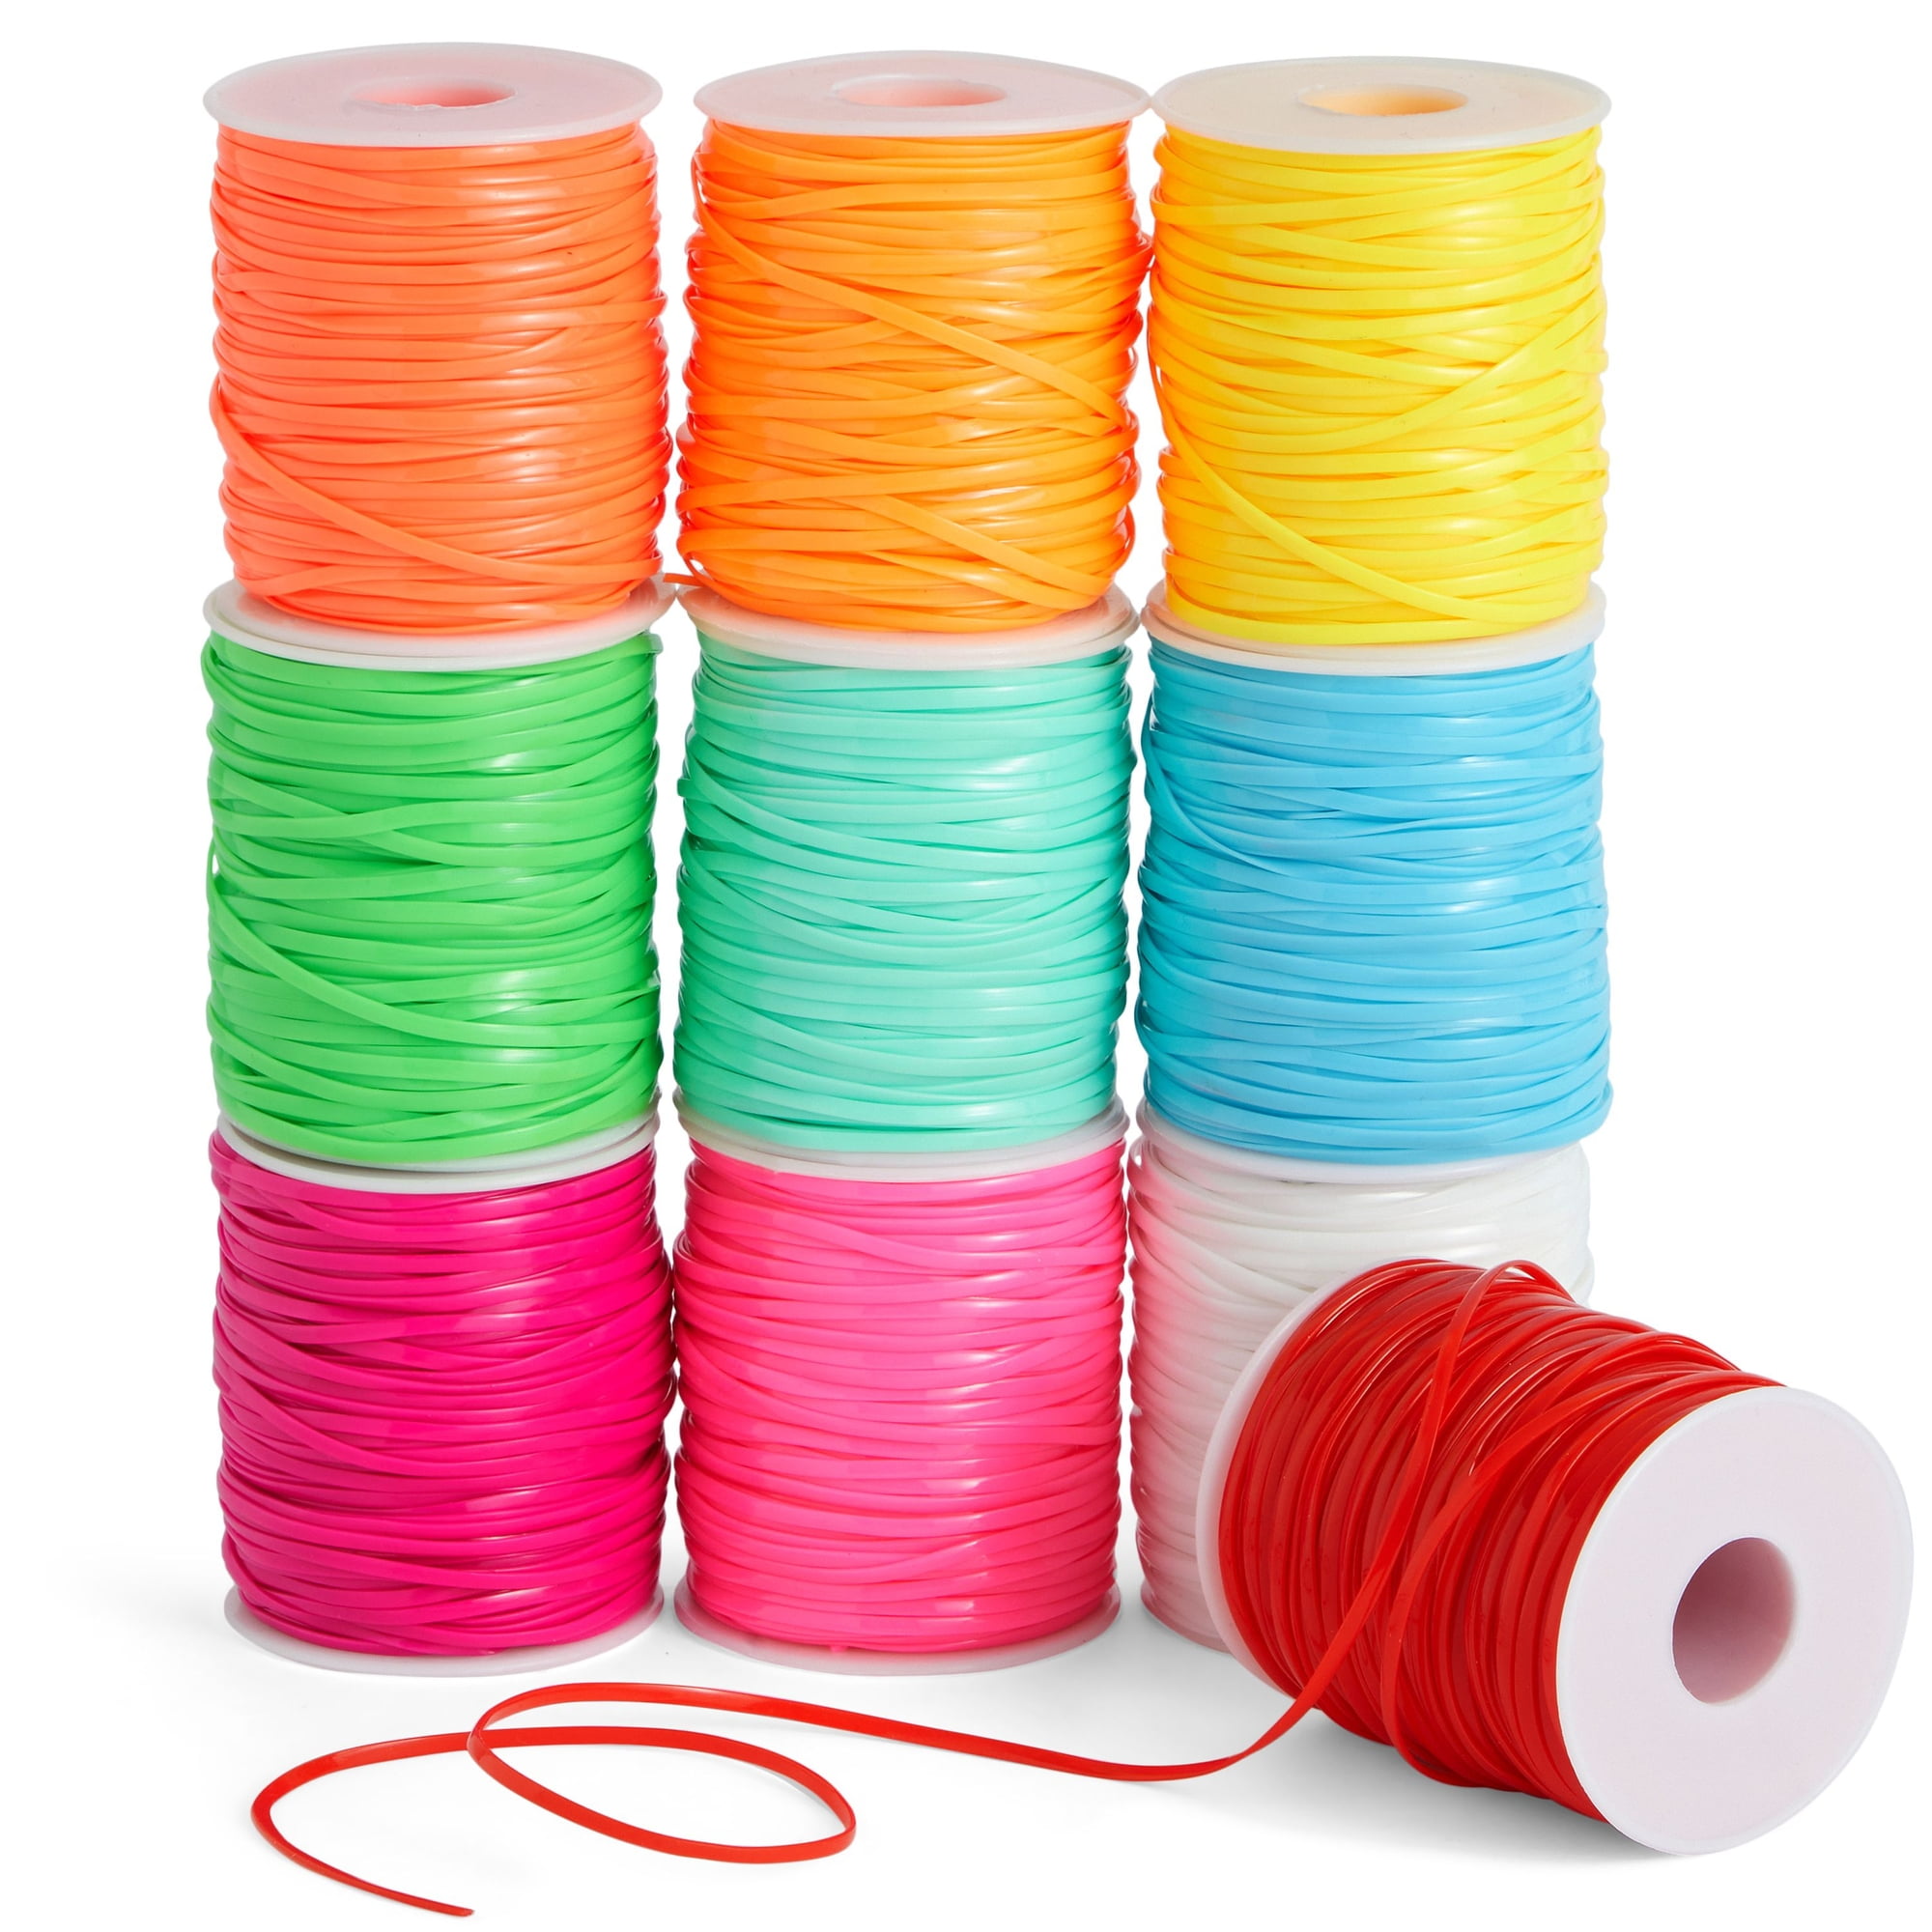 16 Colors Thread Cord for Jewelry Making, Multi-Color Flax String